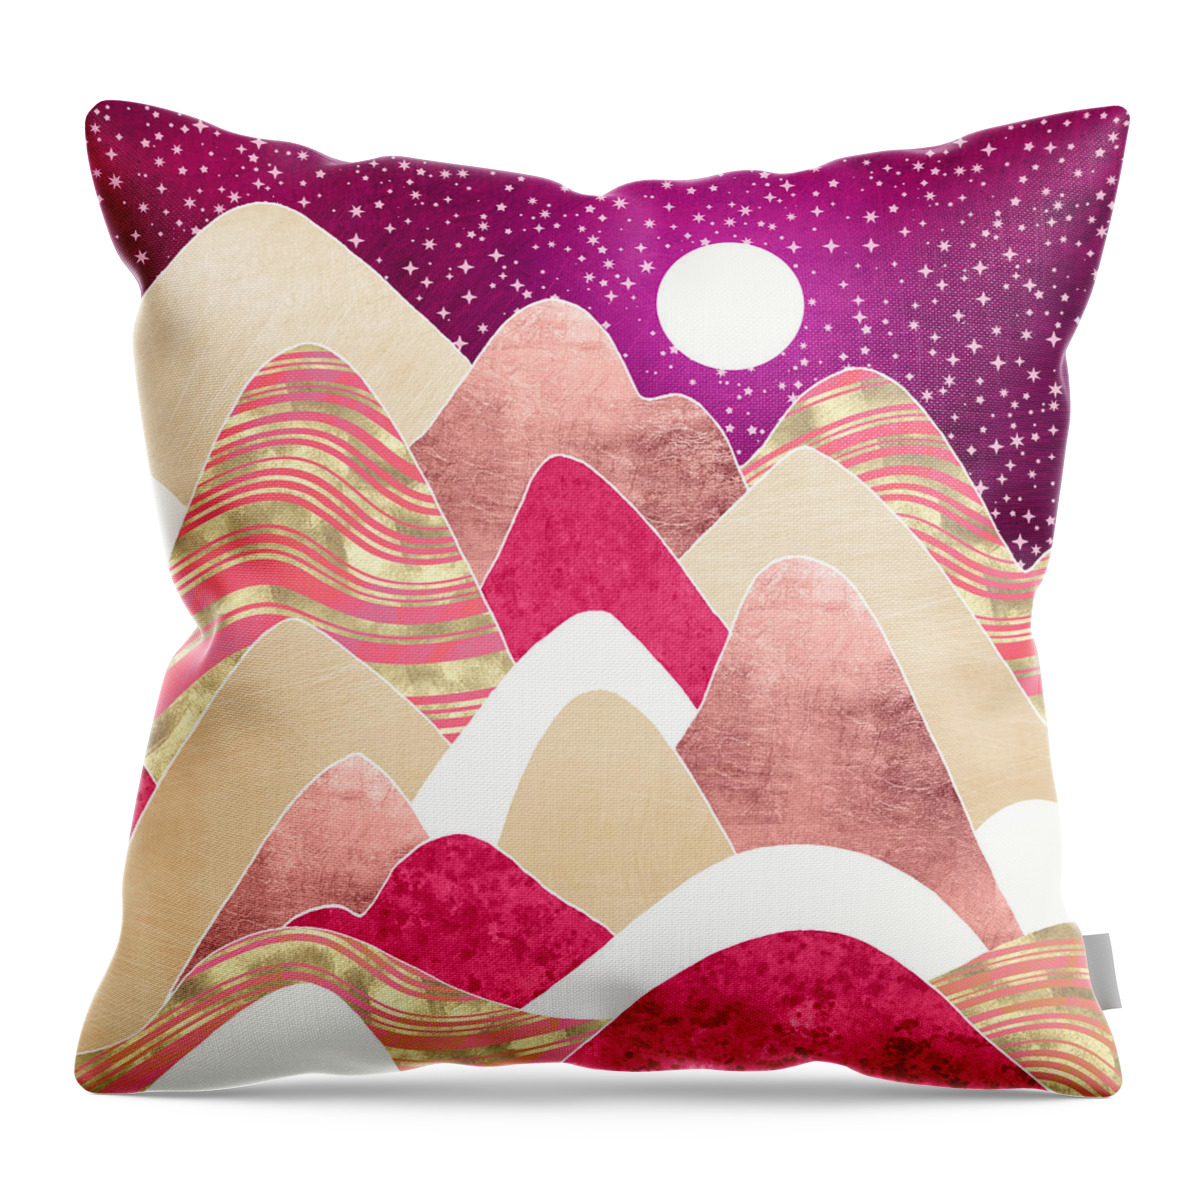 Candyland Throw Pillow featuring the digital art Candyland Vista by Spacefrog Designs